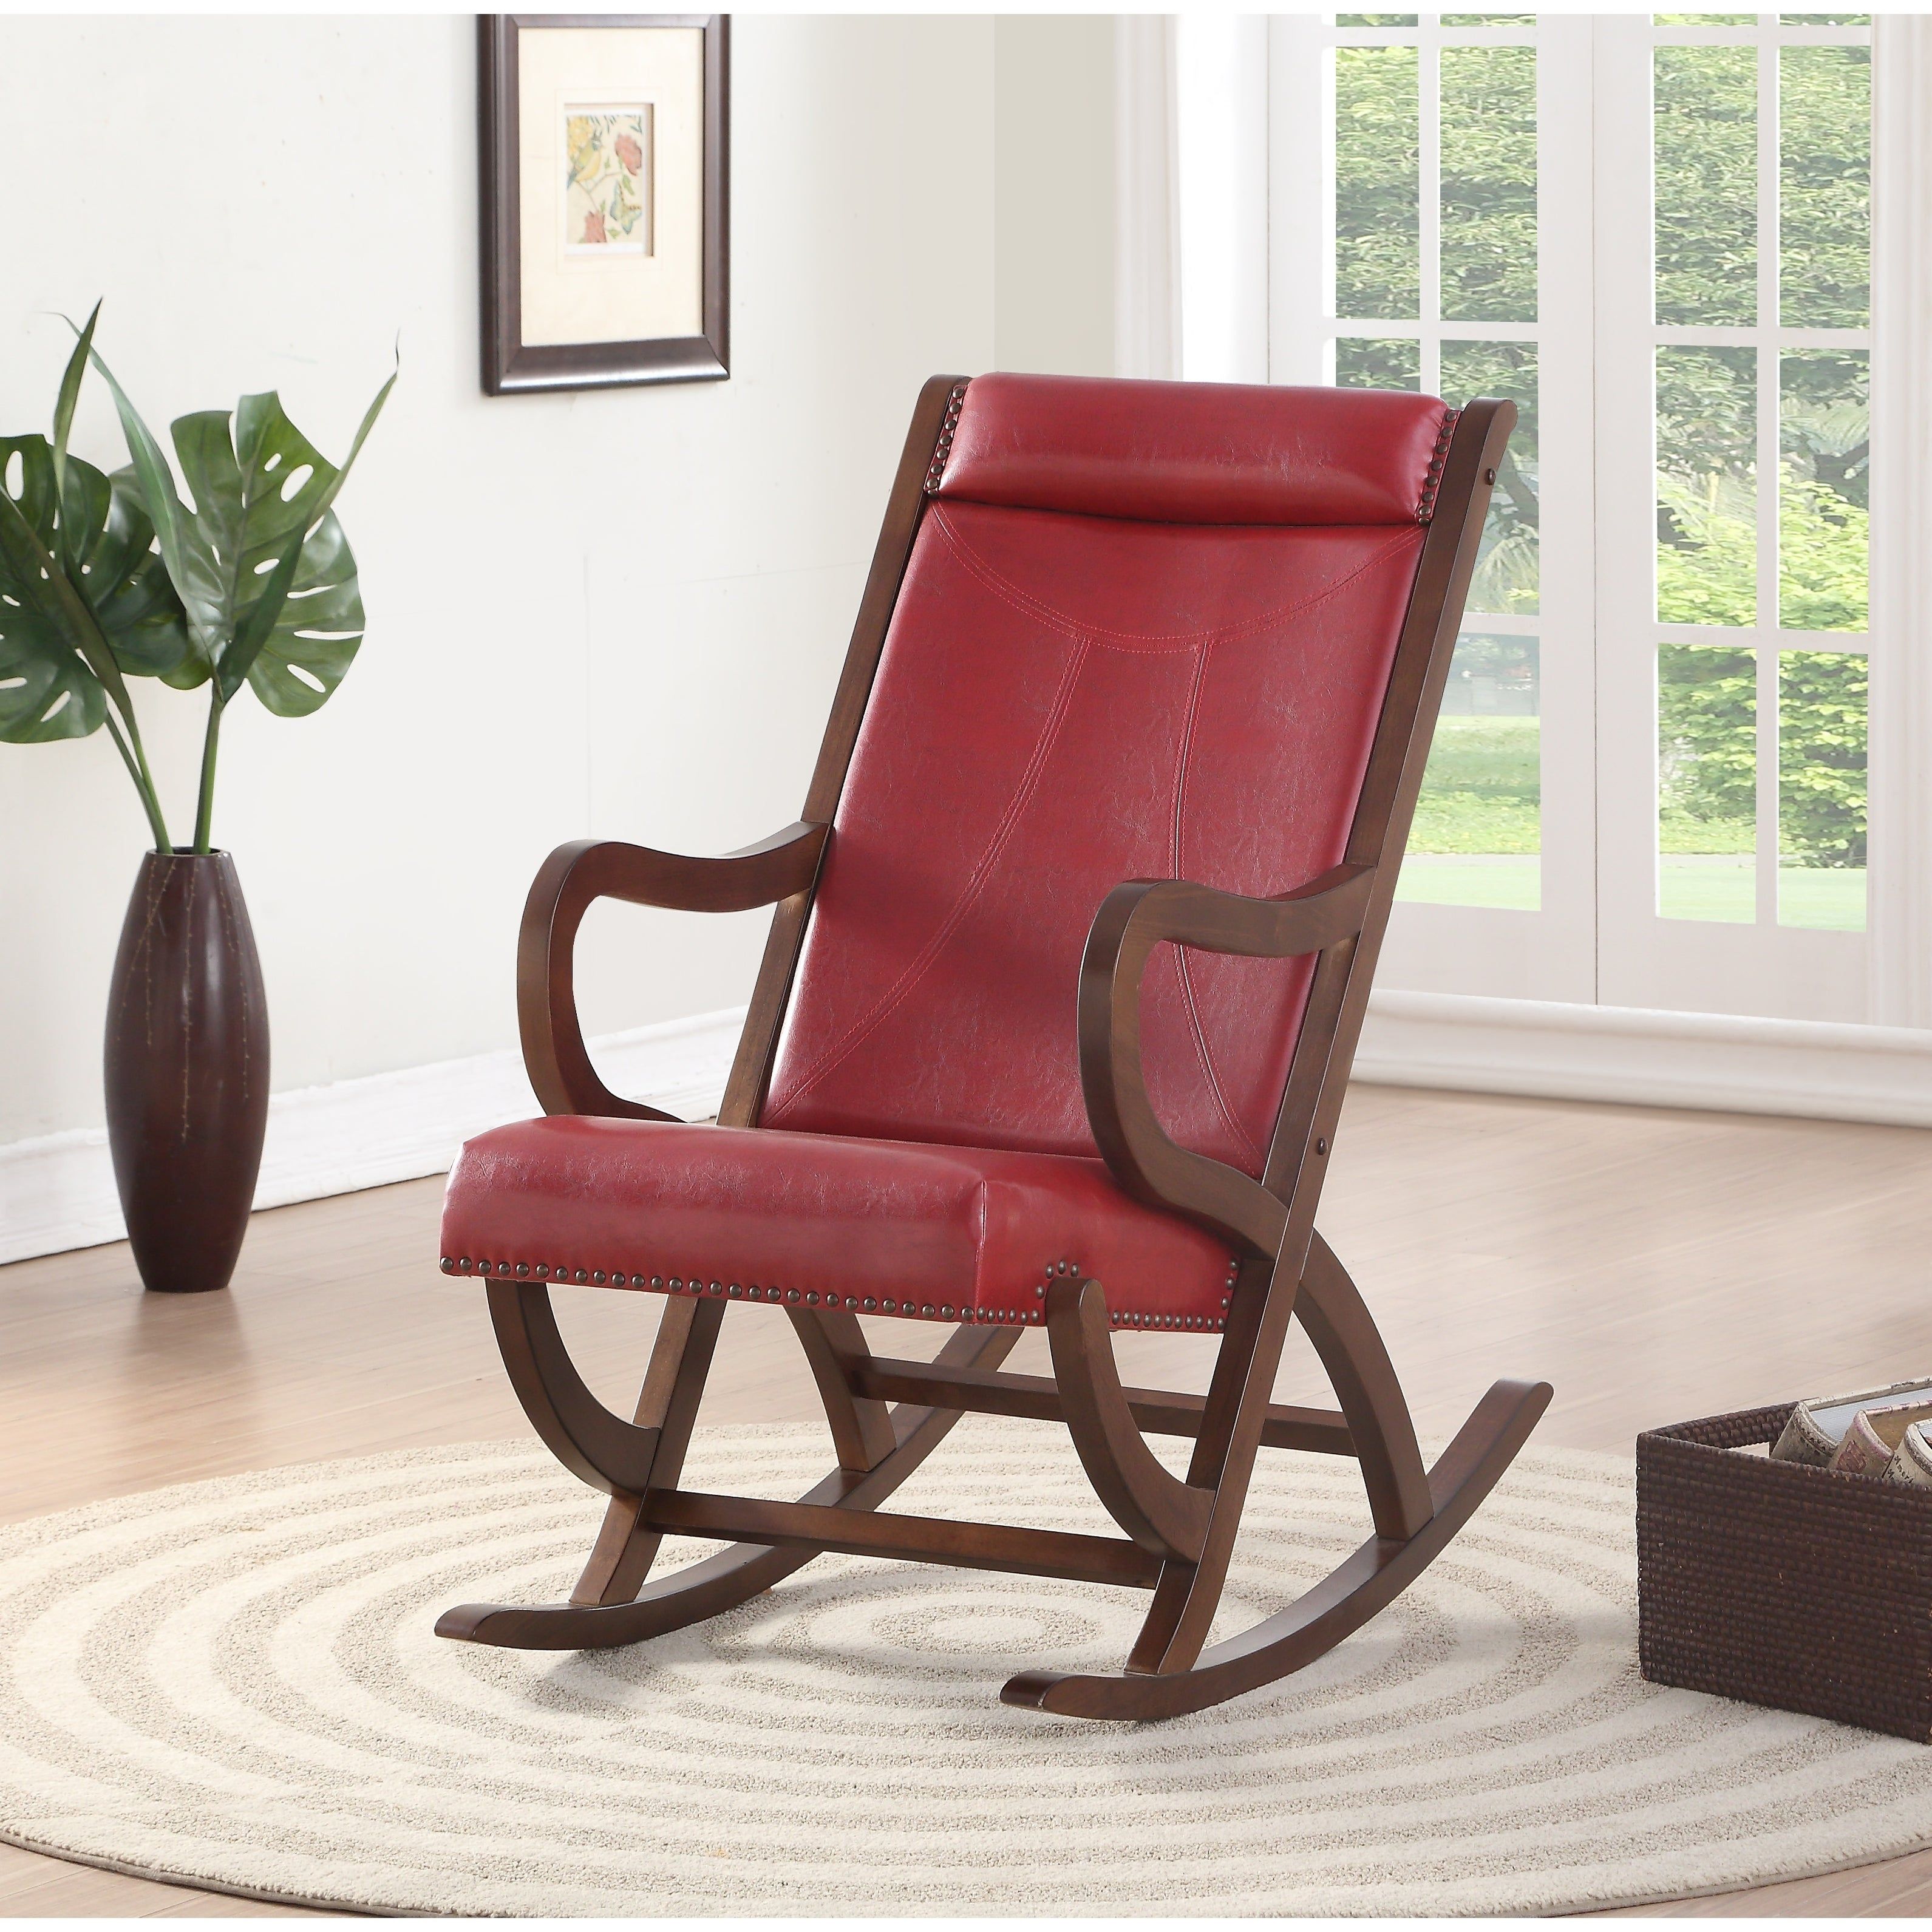 Buy Rocking Chairs, Traditional Living Room Chairs Online At With Regard To Judson Traditional Rocking Chairs (View 3 of 20)